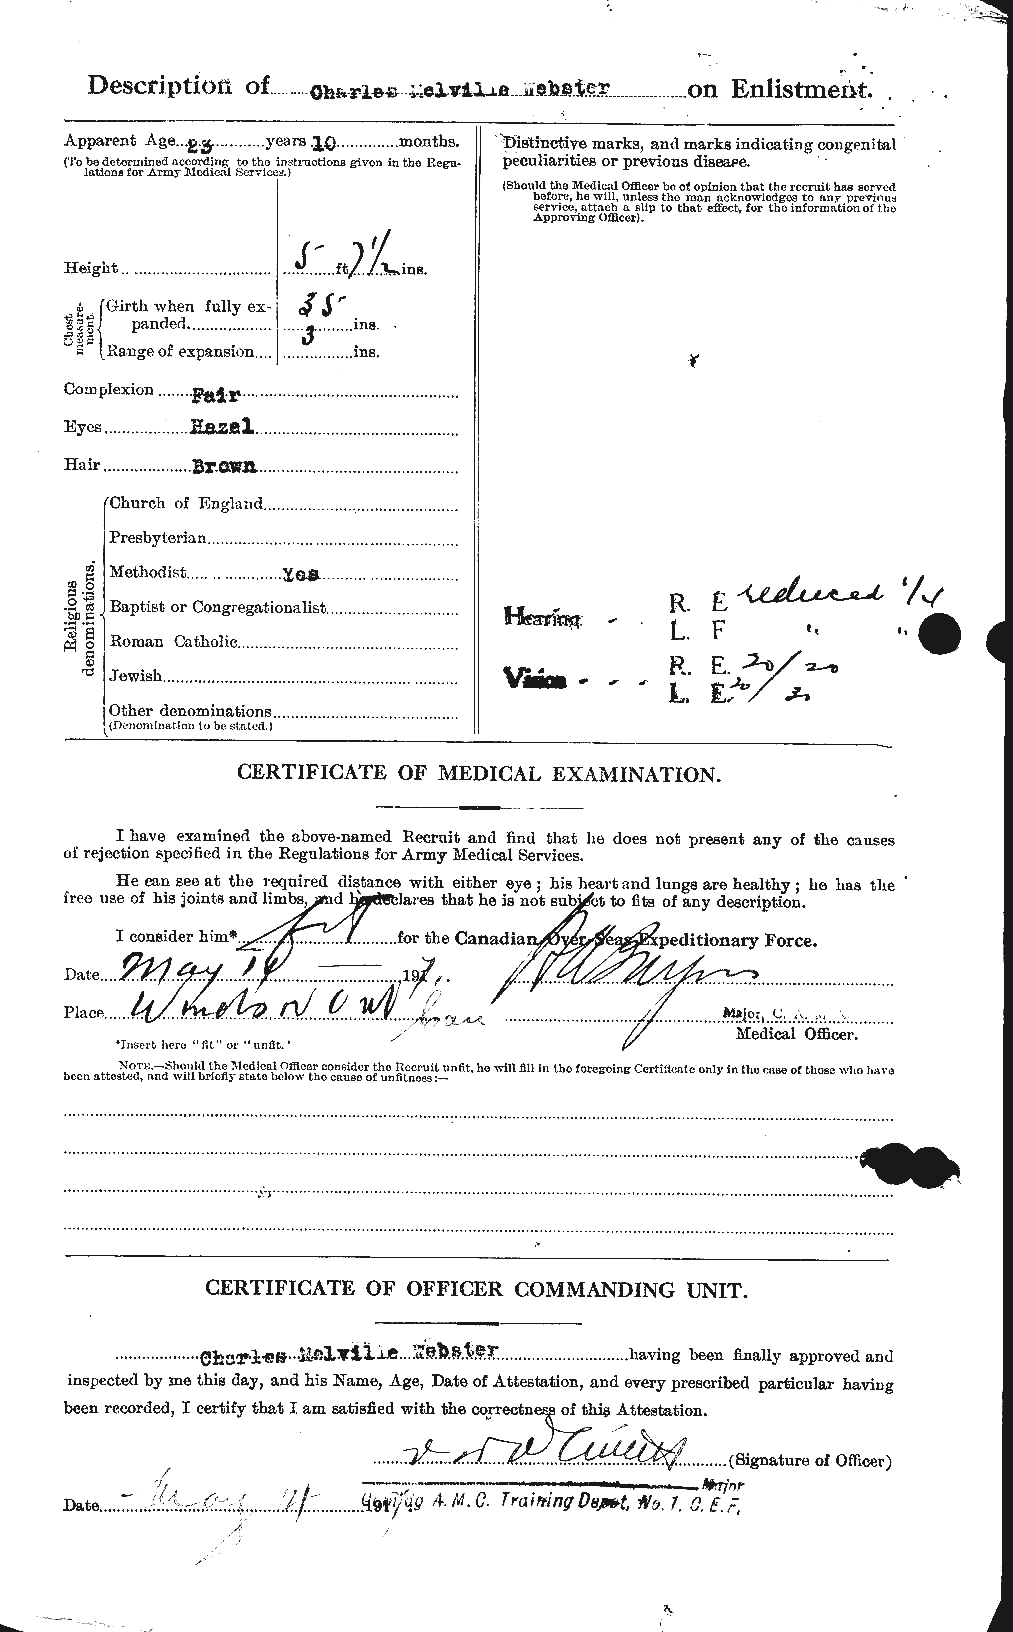 Personnel Records of the First World War - CEF 670302b